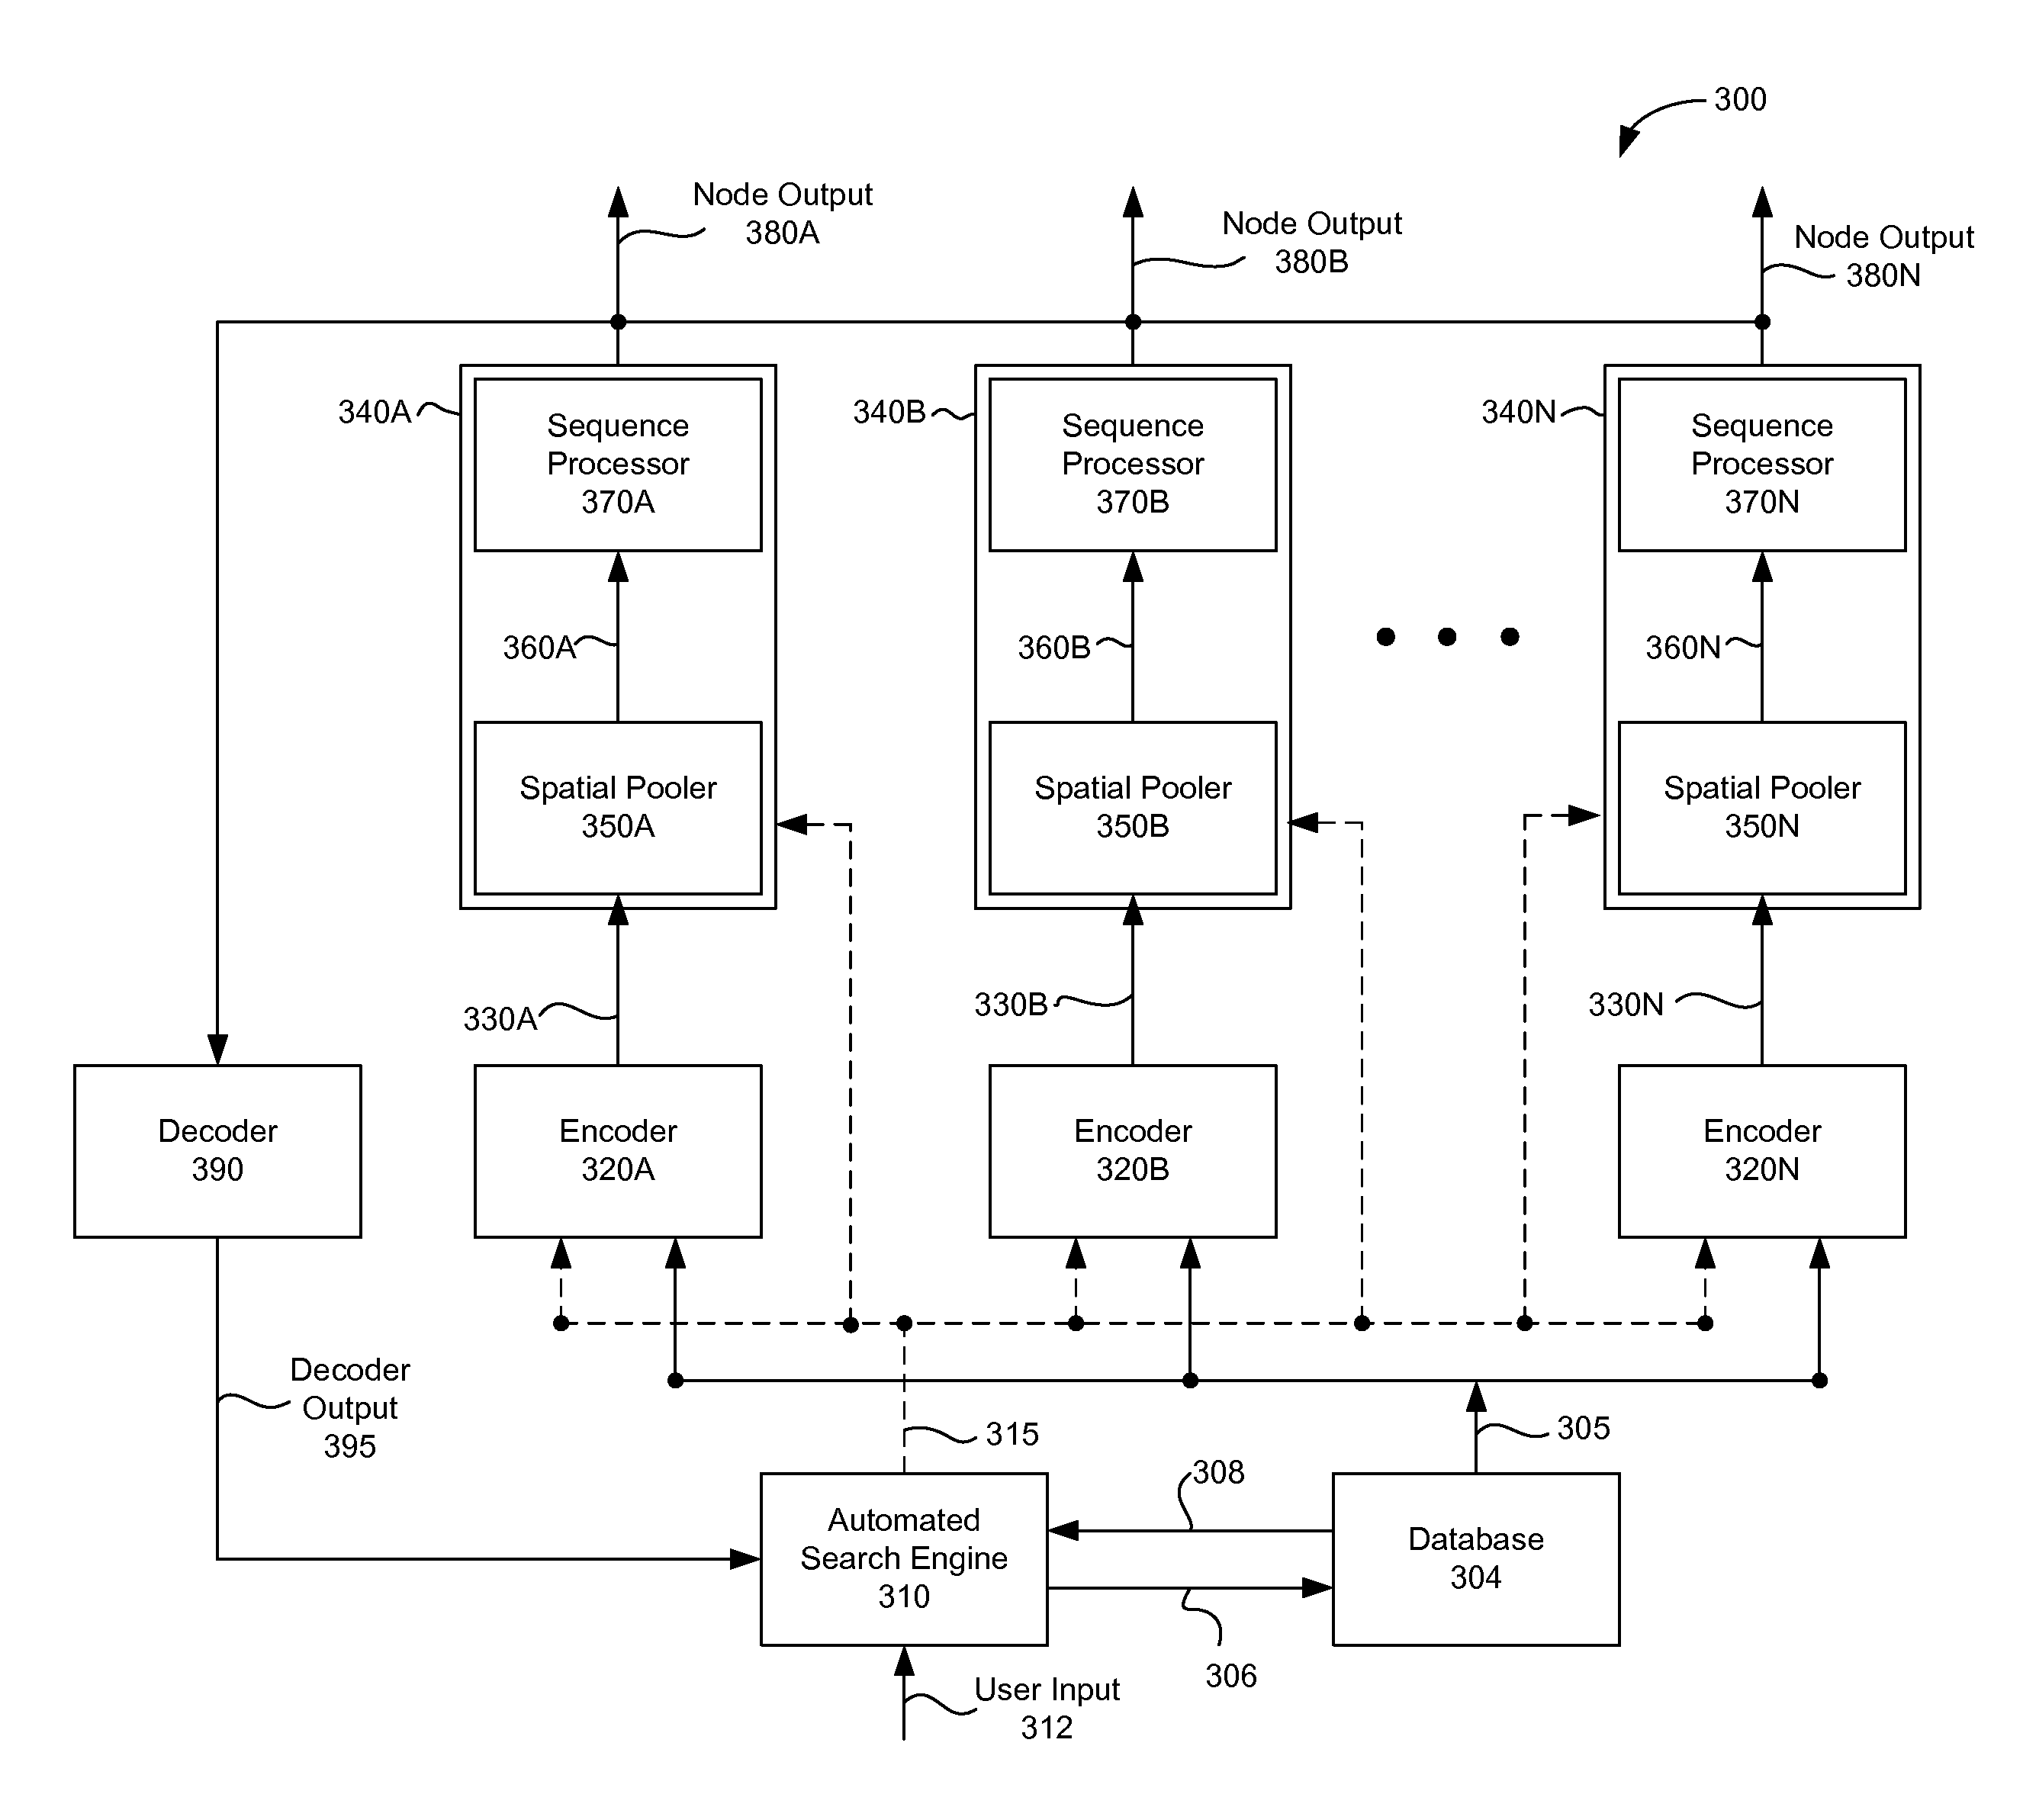 Automated search for detecting patterns and sequences in data using a spatial and temporal memory system